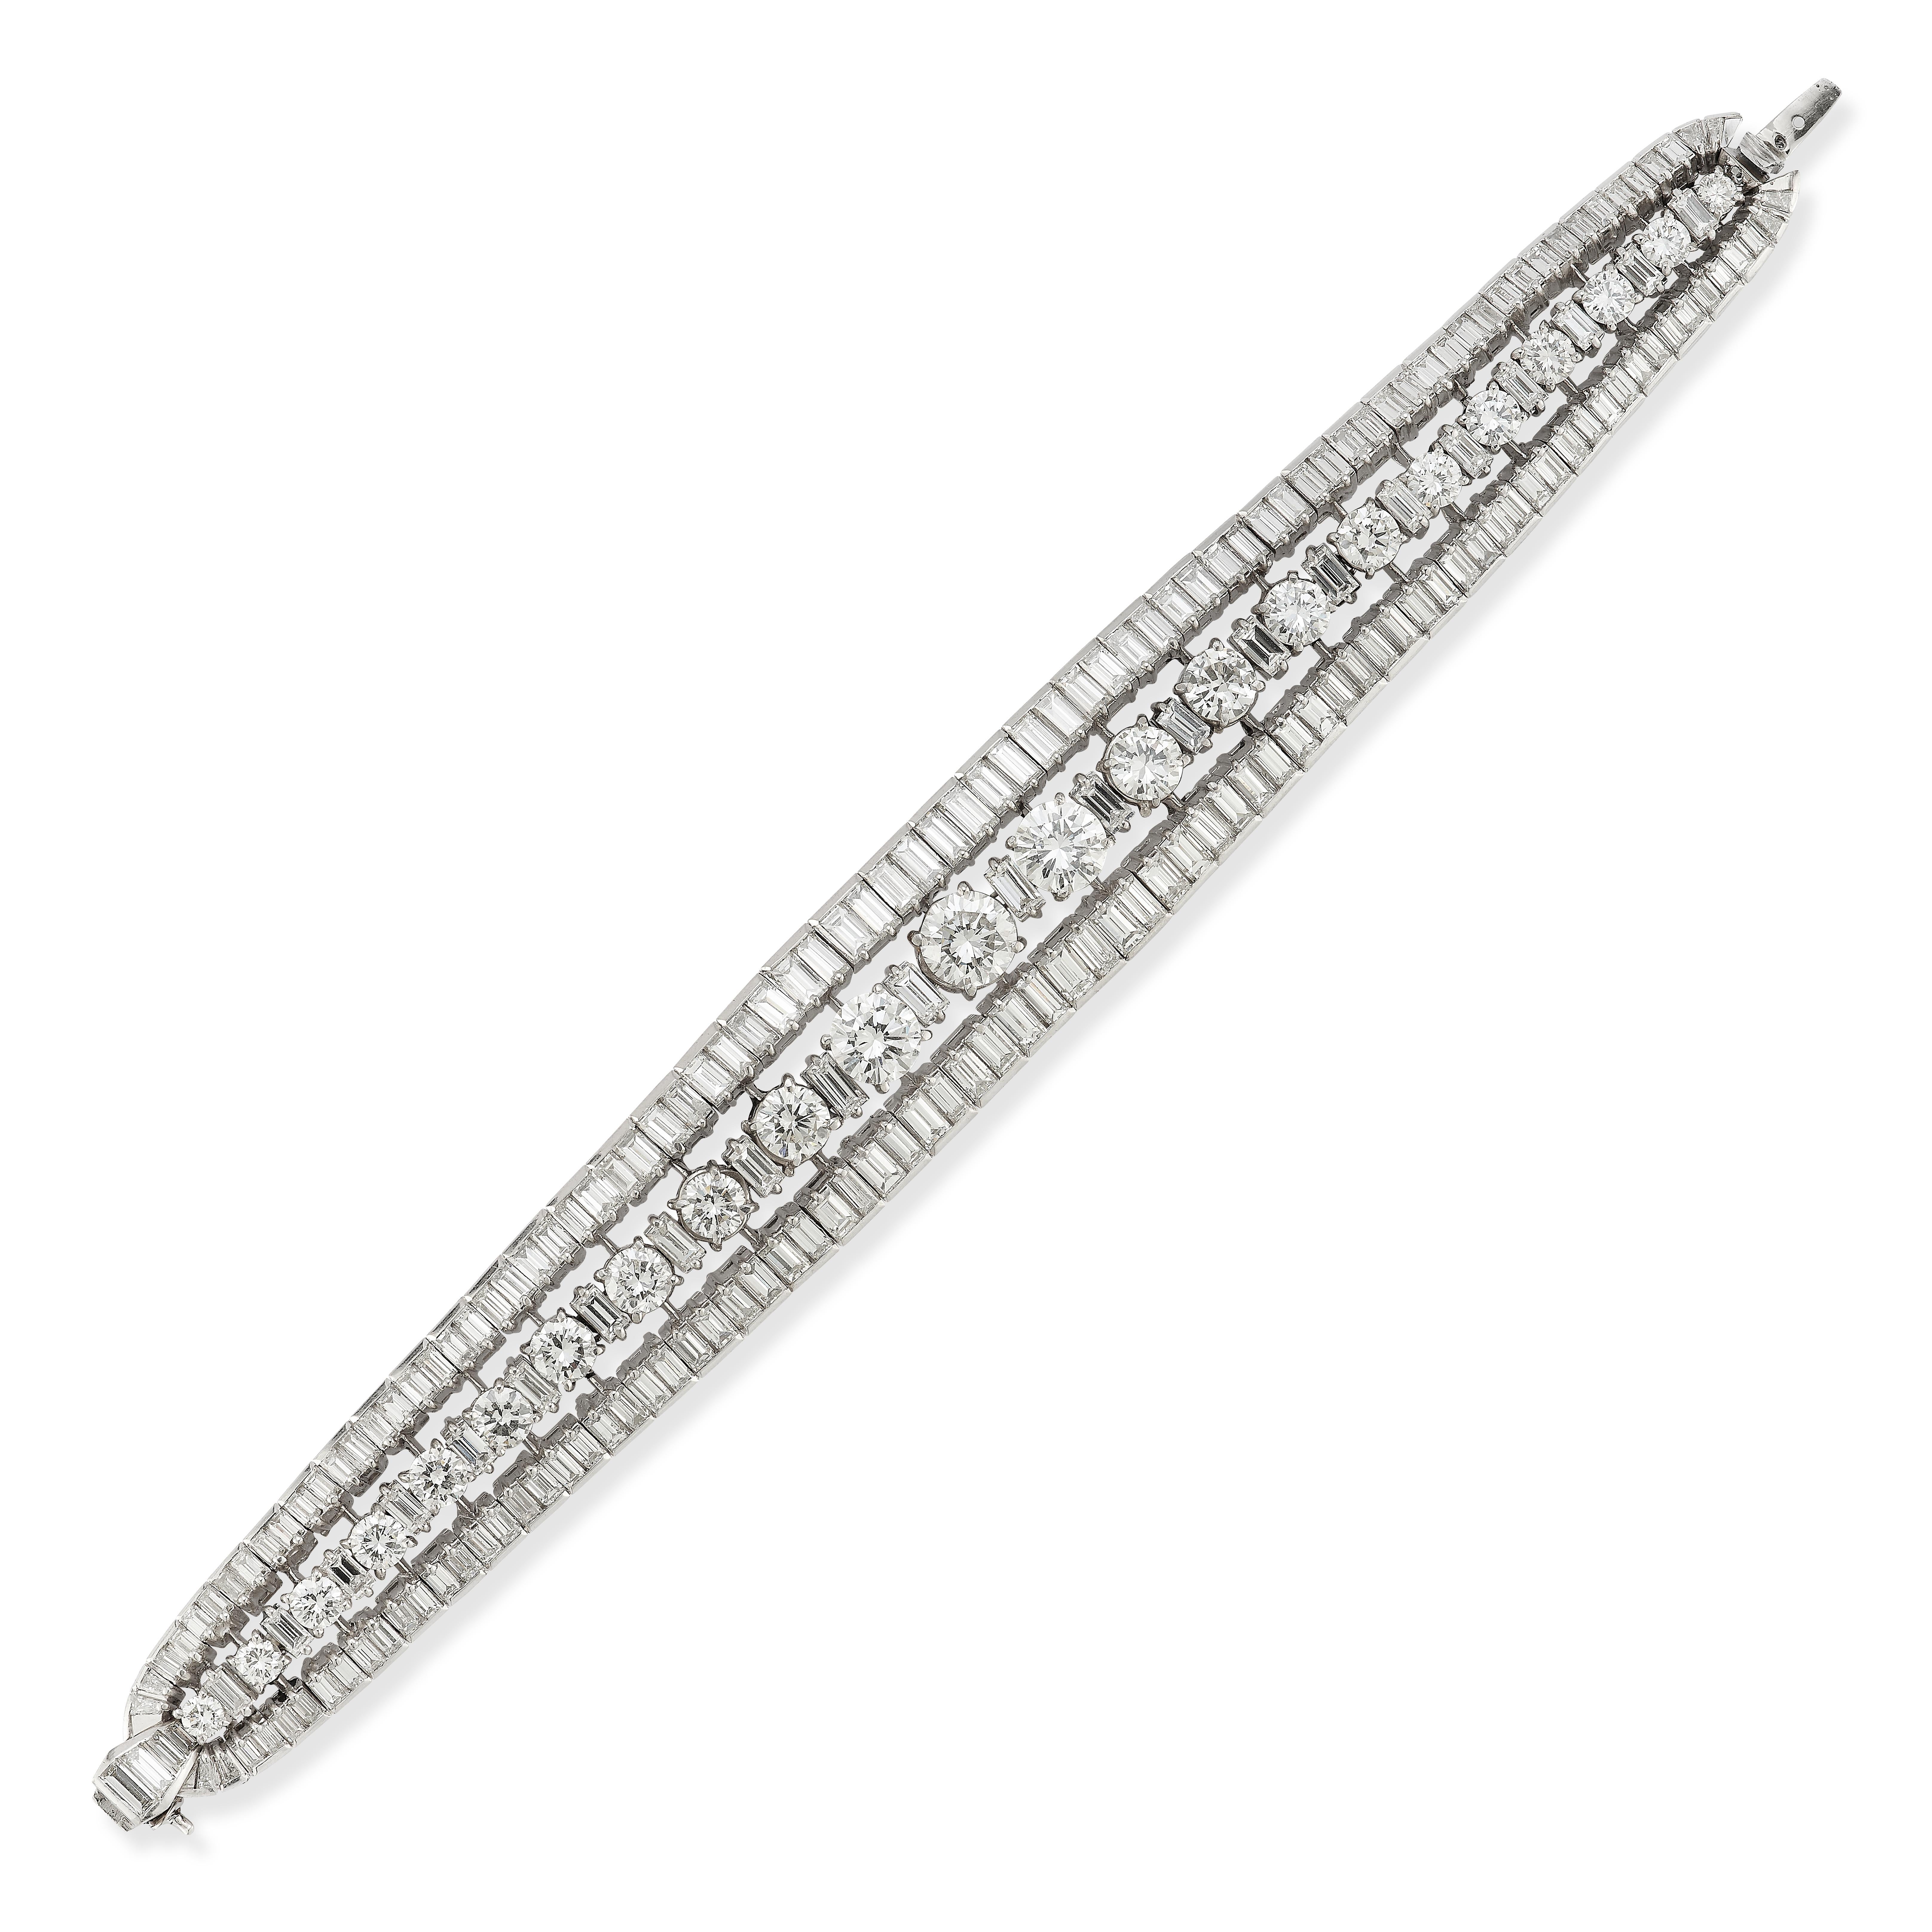 Mid Century Diamond Bracelet

A platinum bracelet set with round cut diamonds and baguette cut diamonds

Accompanied by a GAL report stating the total diamond weight of this bracelet is 27.40 carats

Length: 7